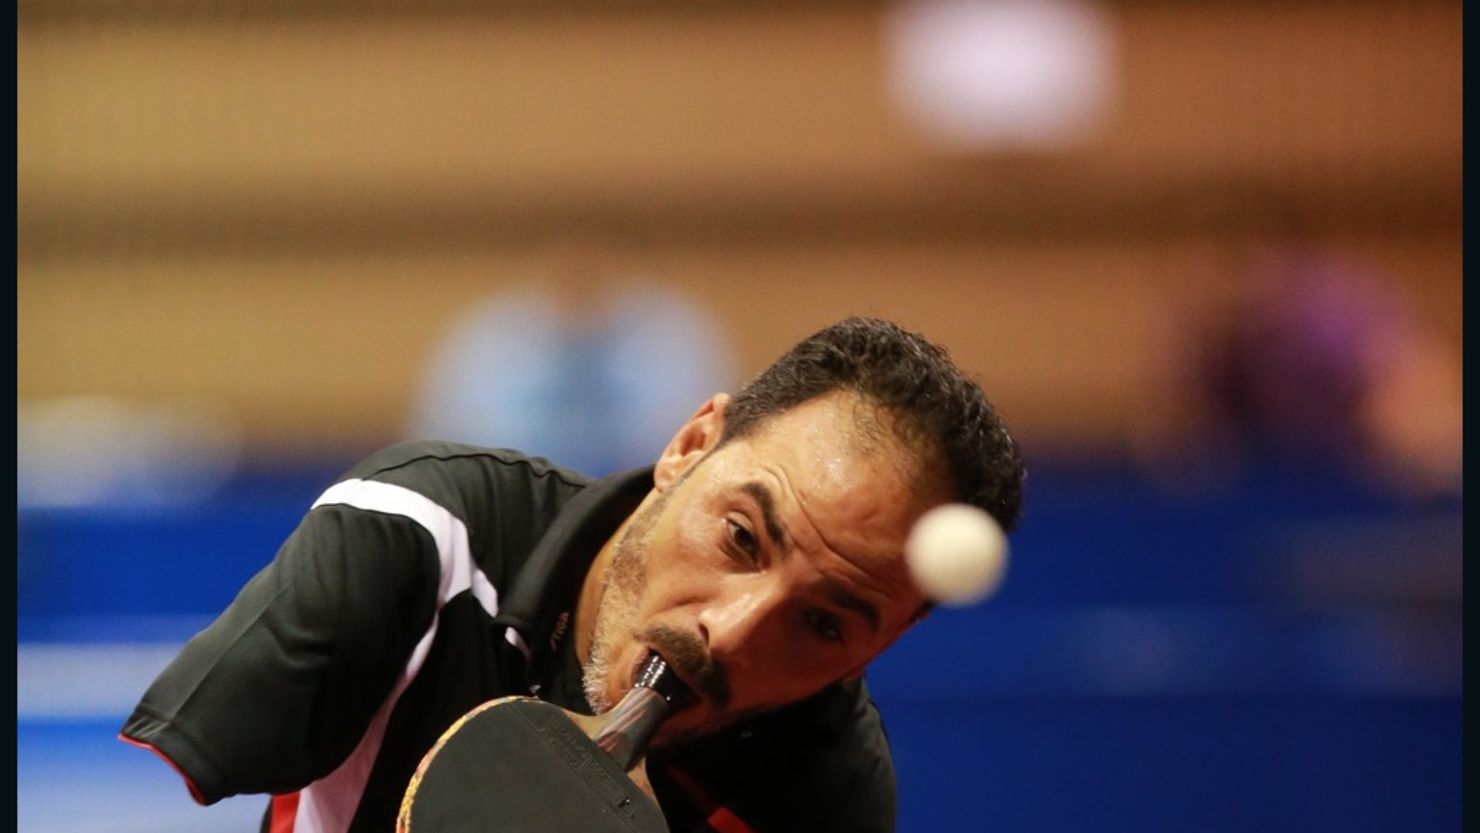 Para-table tennis player Ibrahim Hamadto, who lost his arms in an accident, hopes his story inspires others.